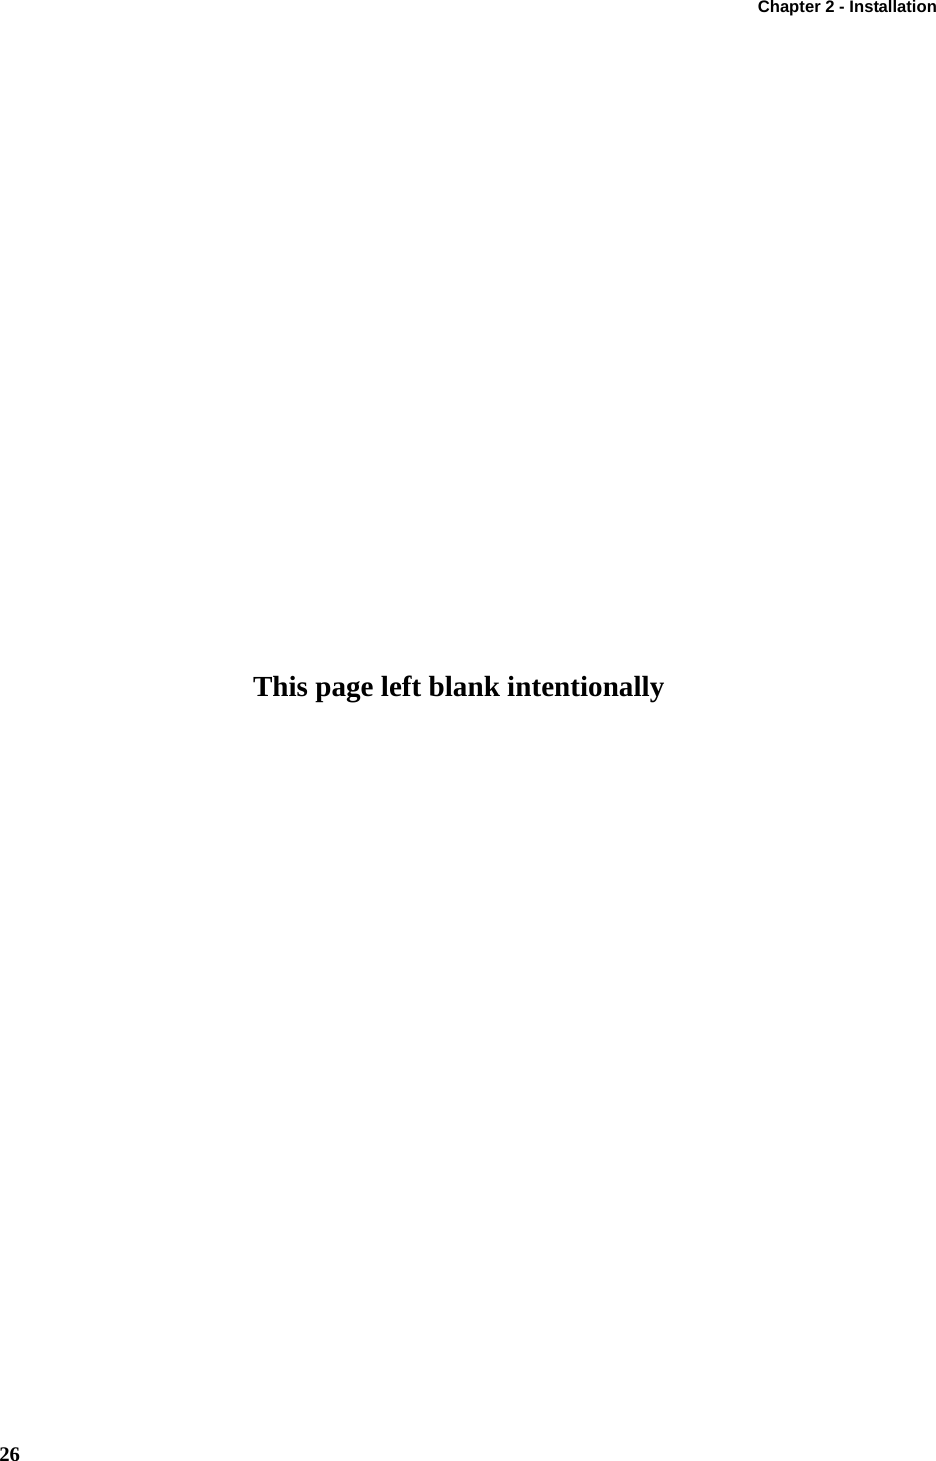 Chapter 2 - Installation26This page left blank intentionally